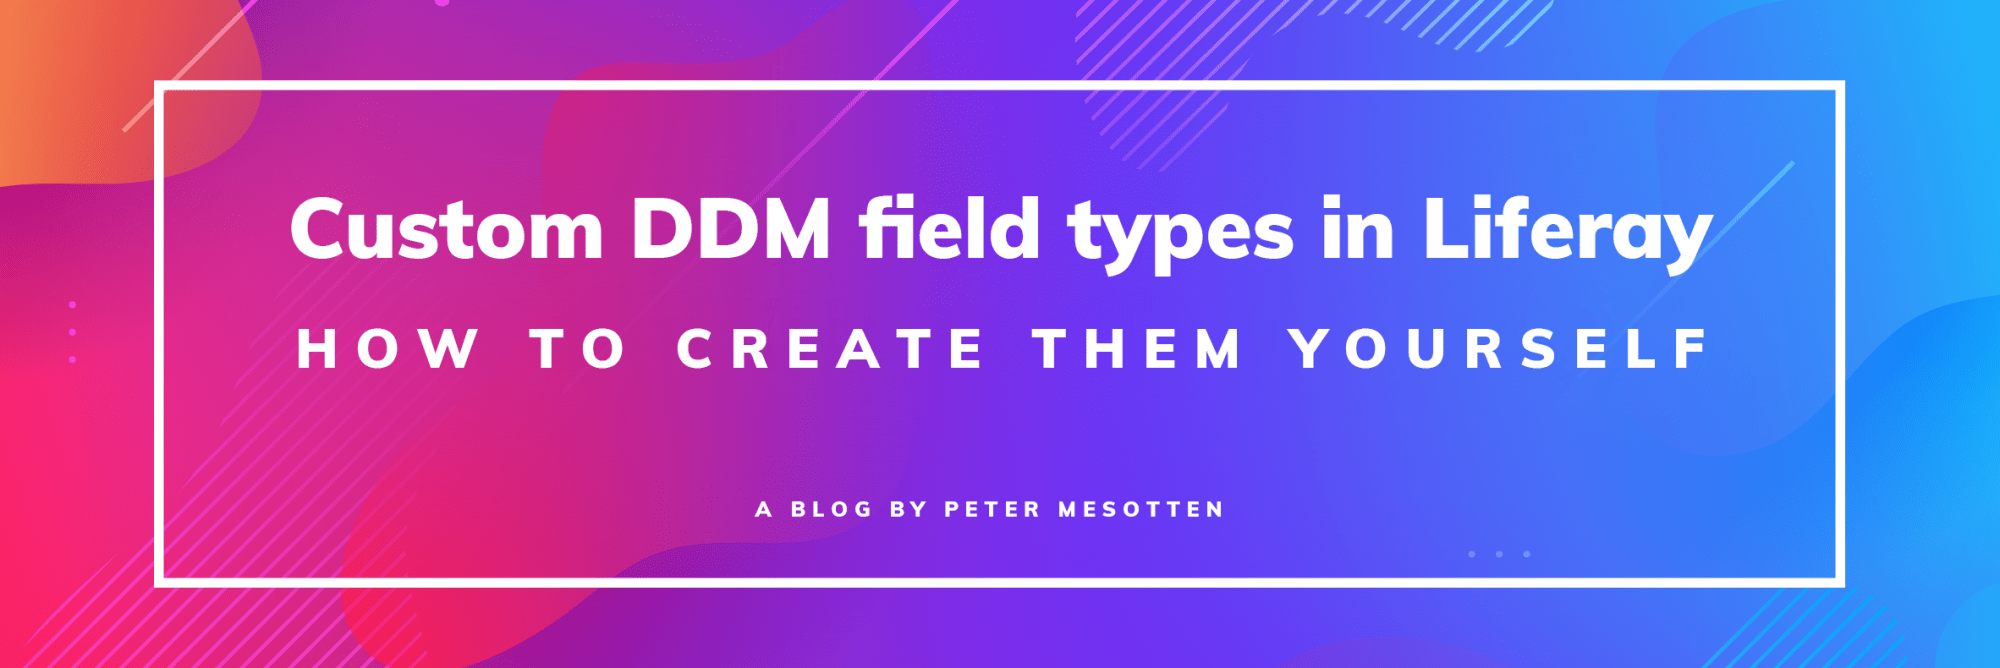 custom DDM field types will be explained in this blogpost